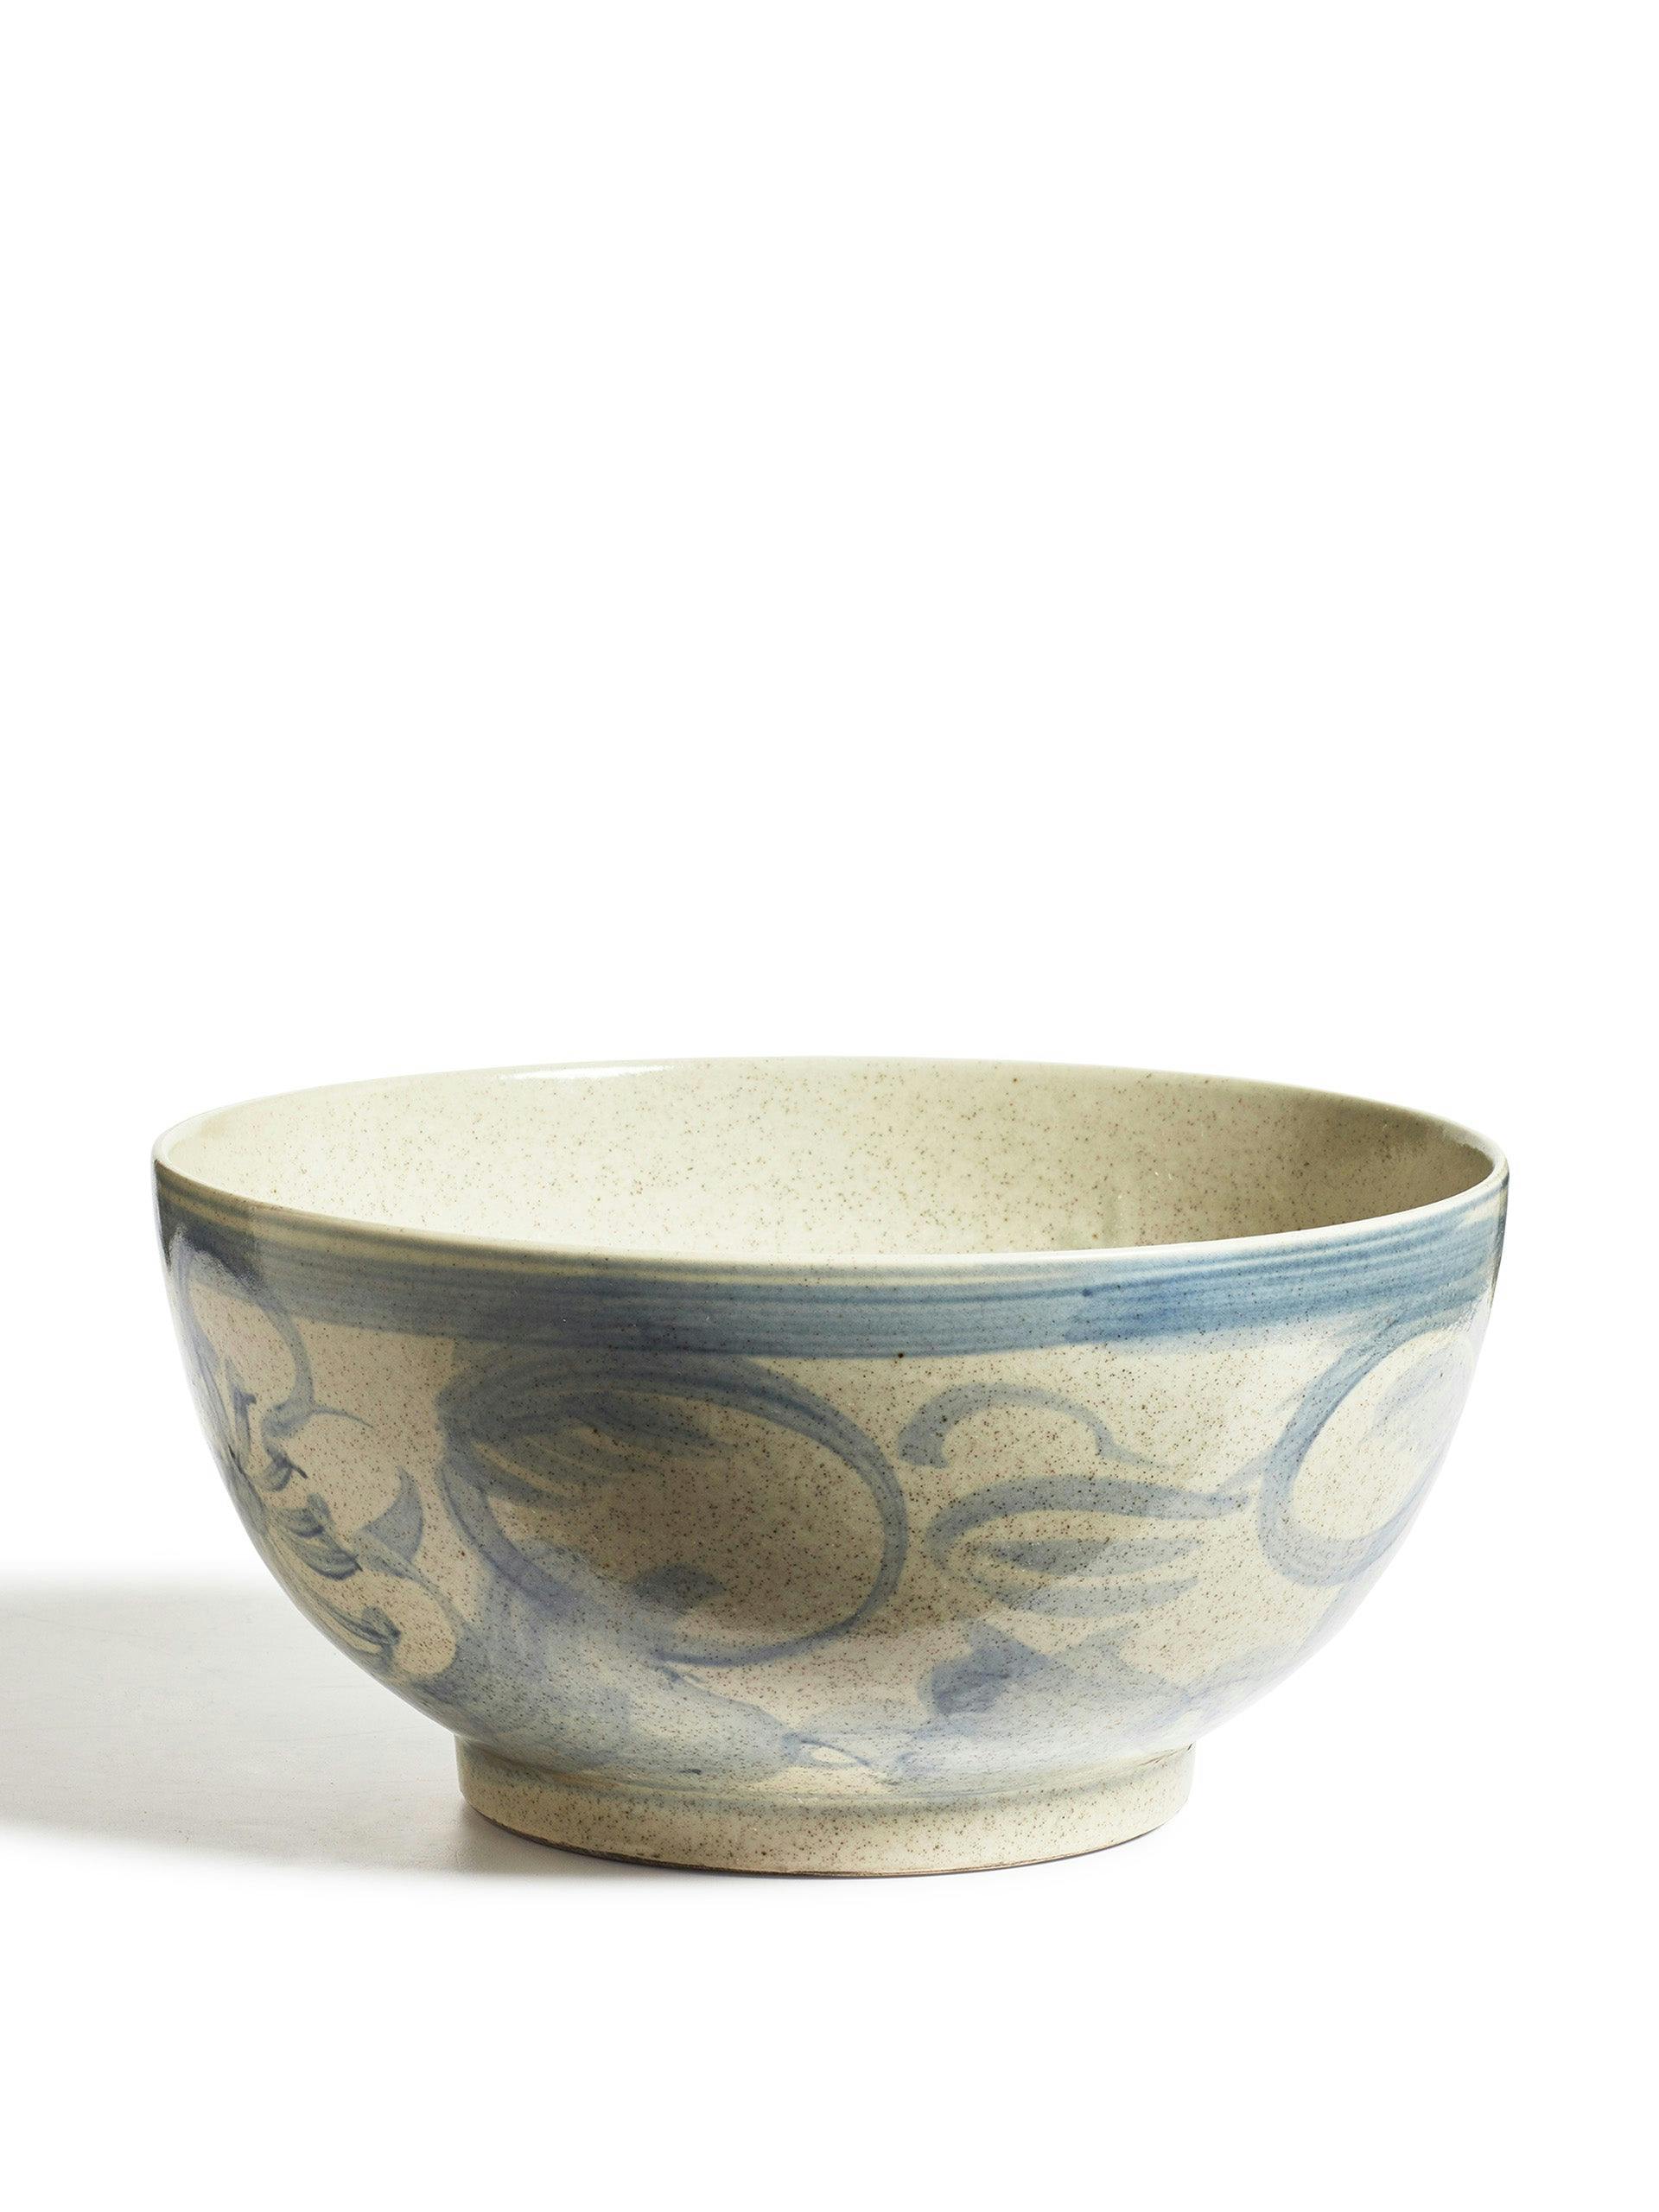 Blue and white Claude bowl